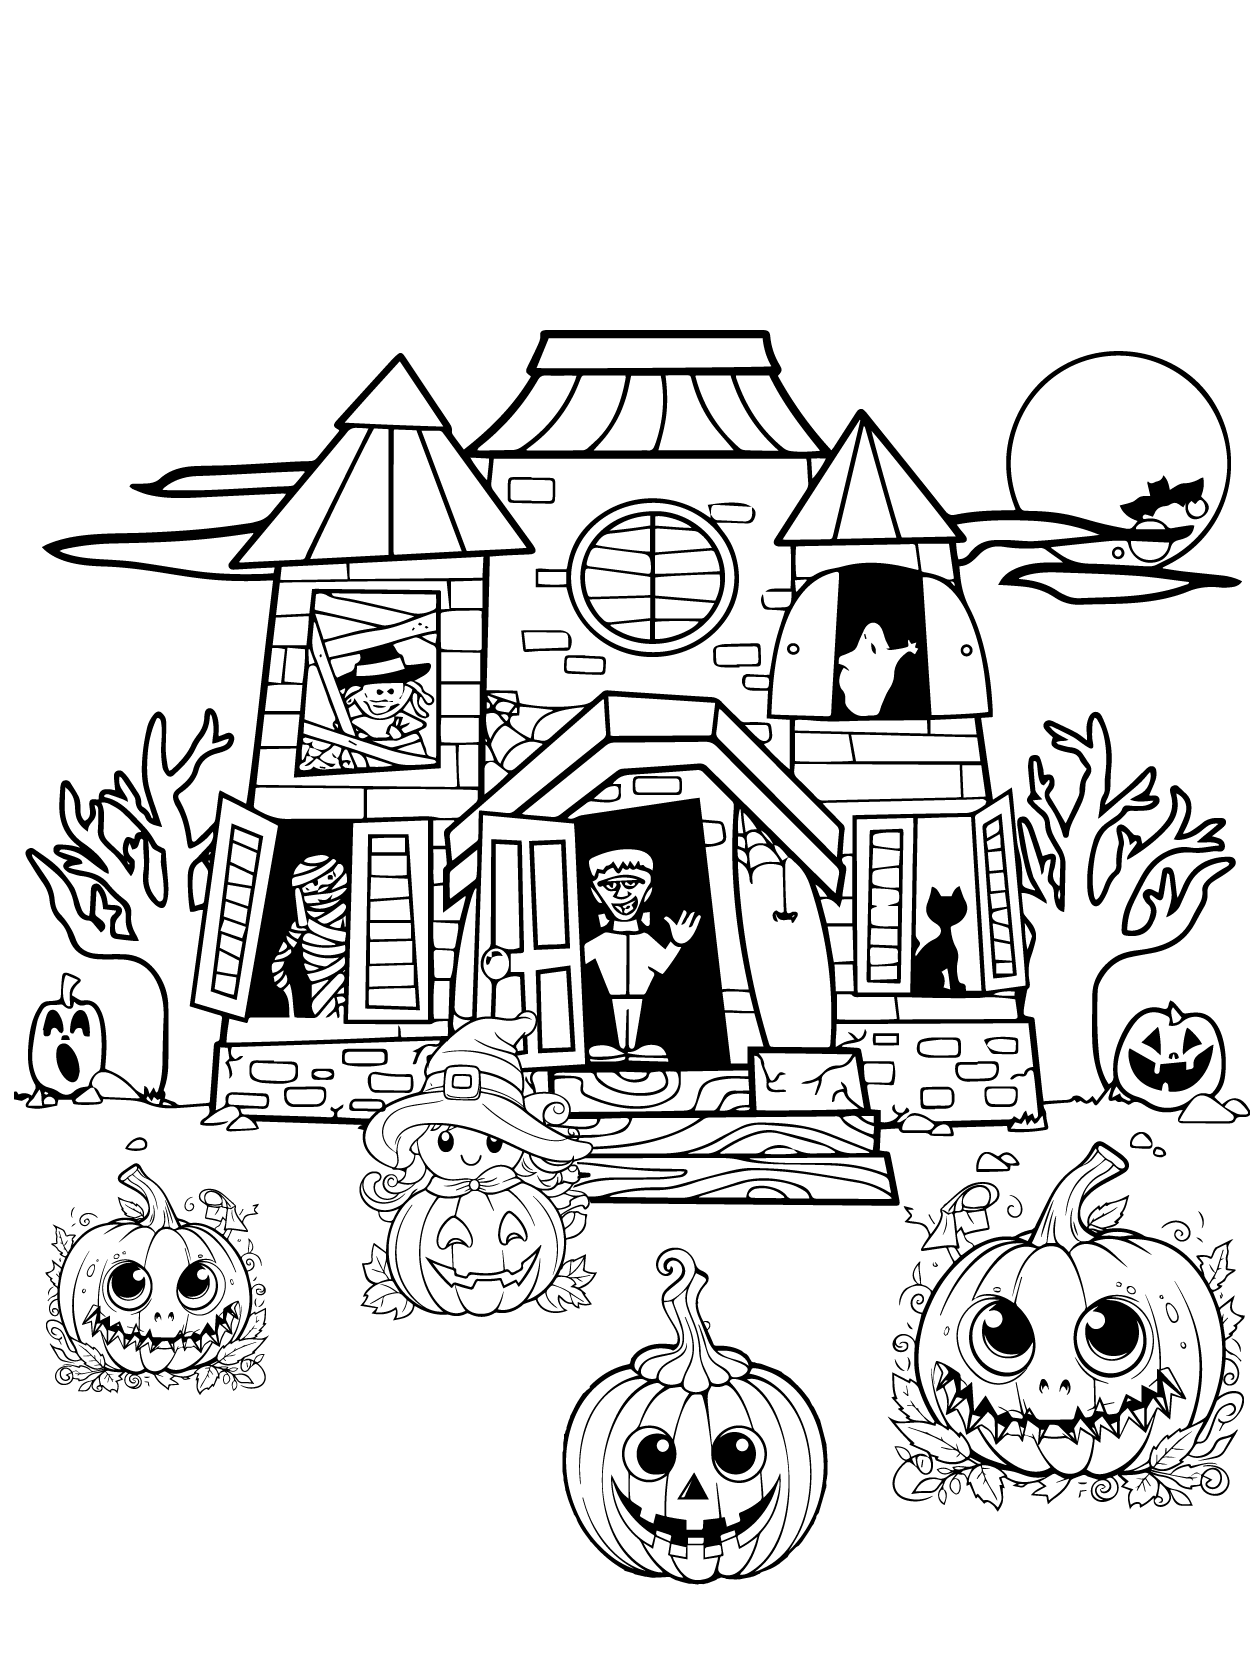 Kawaii Halloween Coloring Pages Printable for Free Download